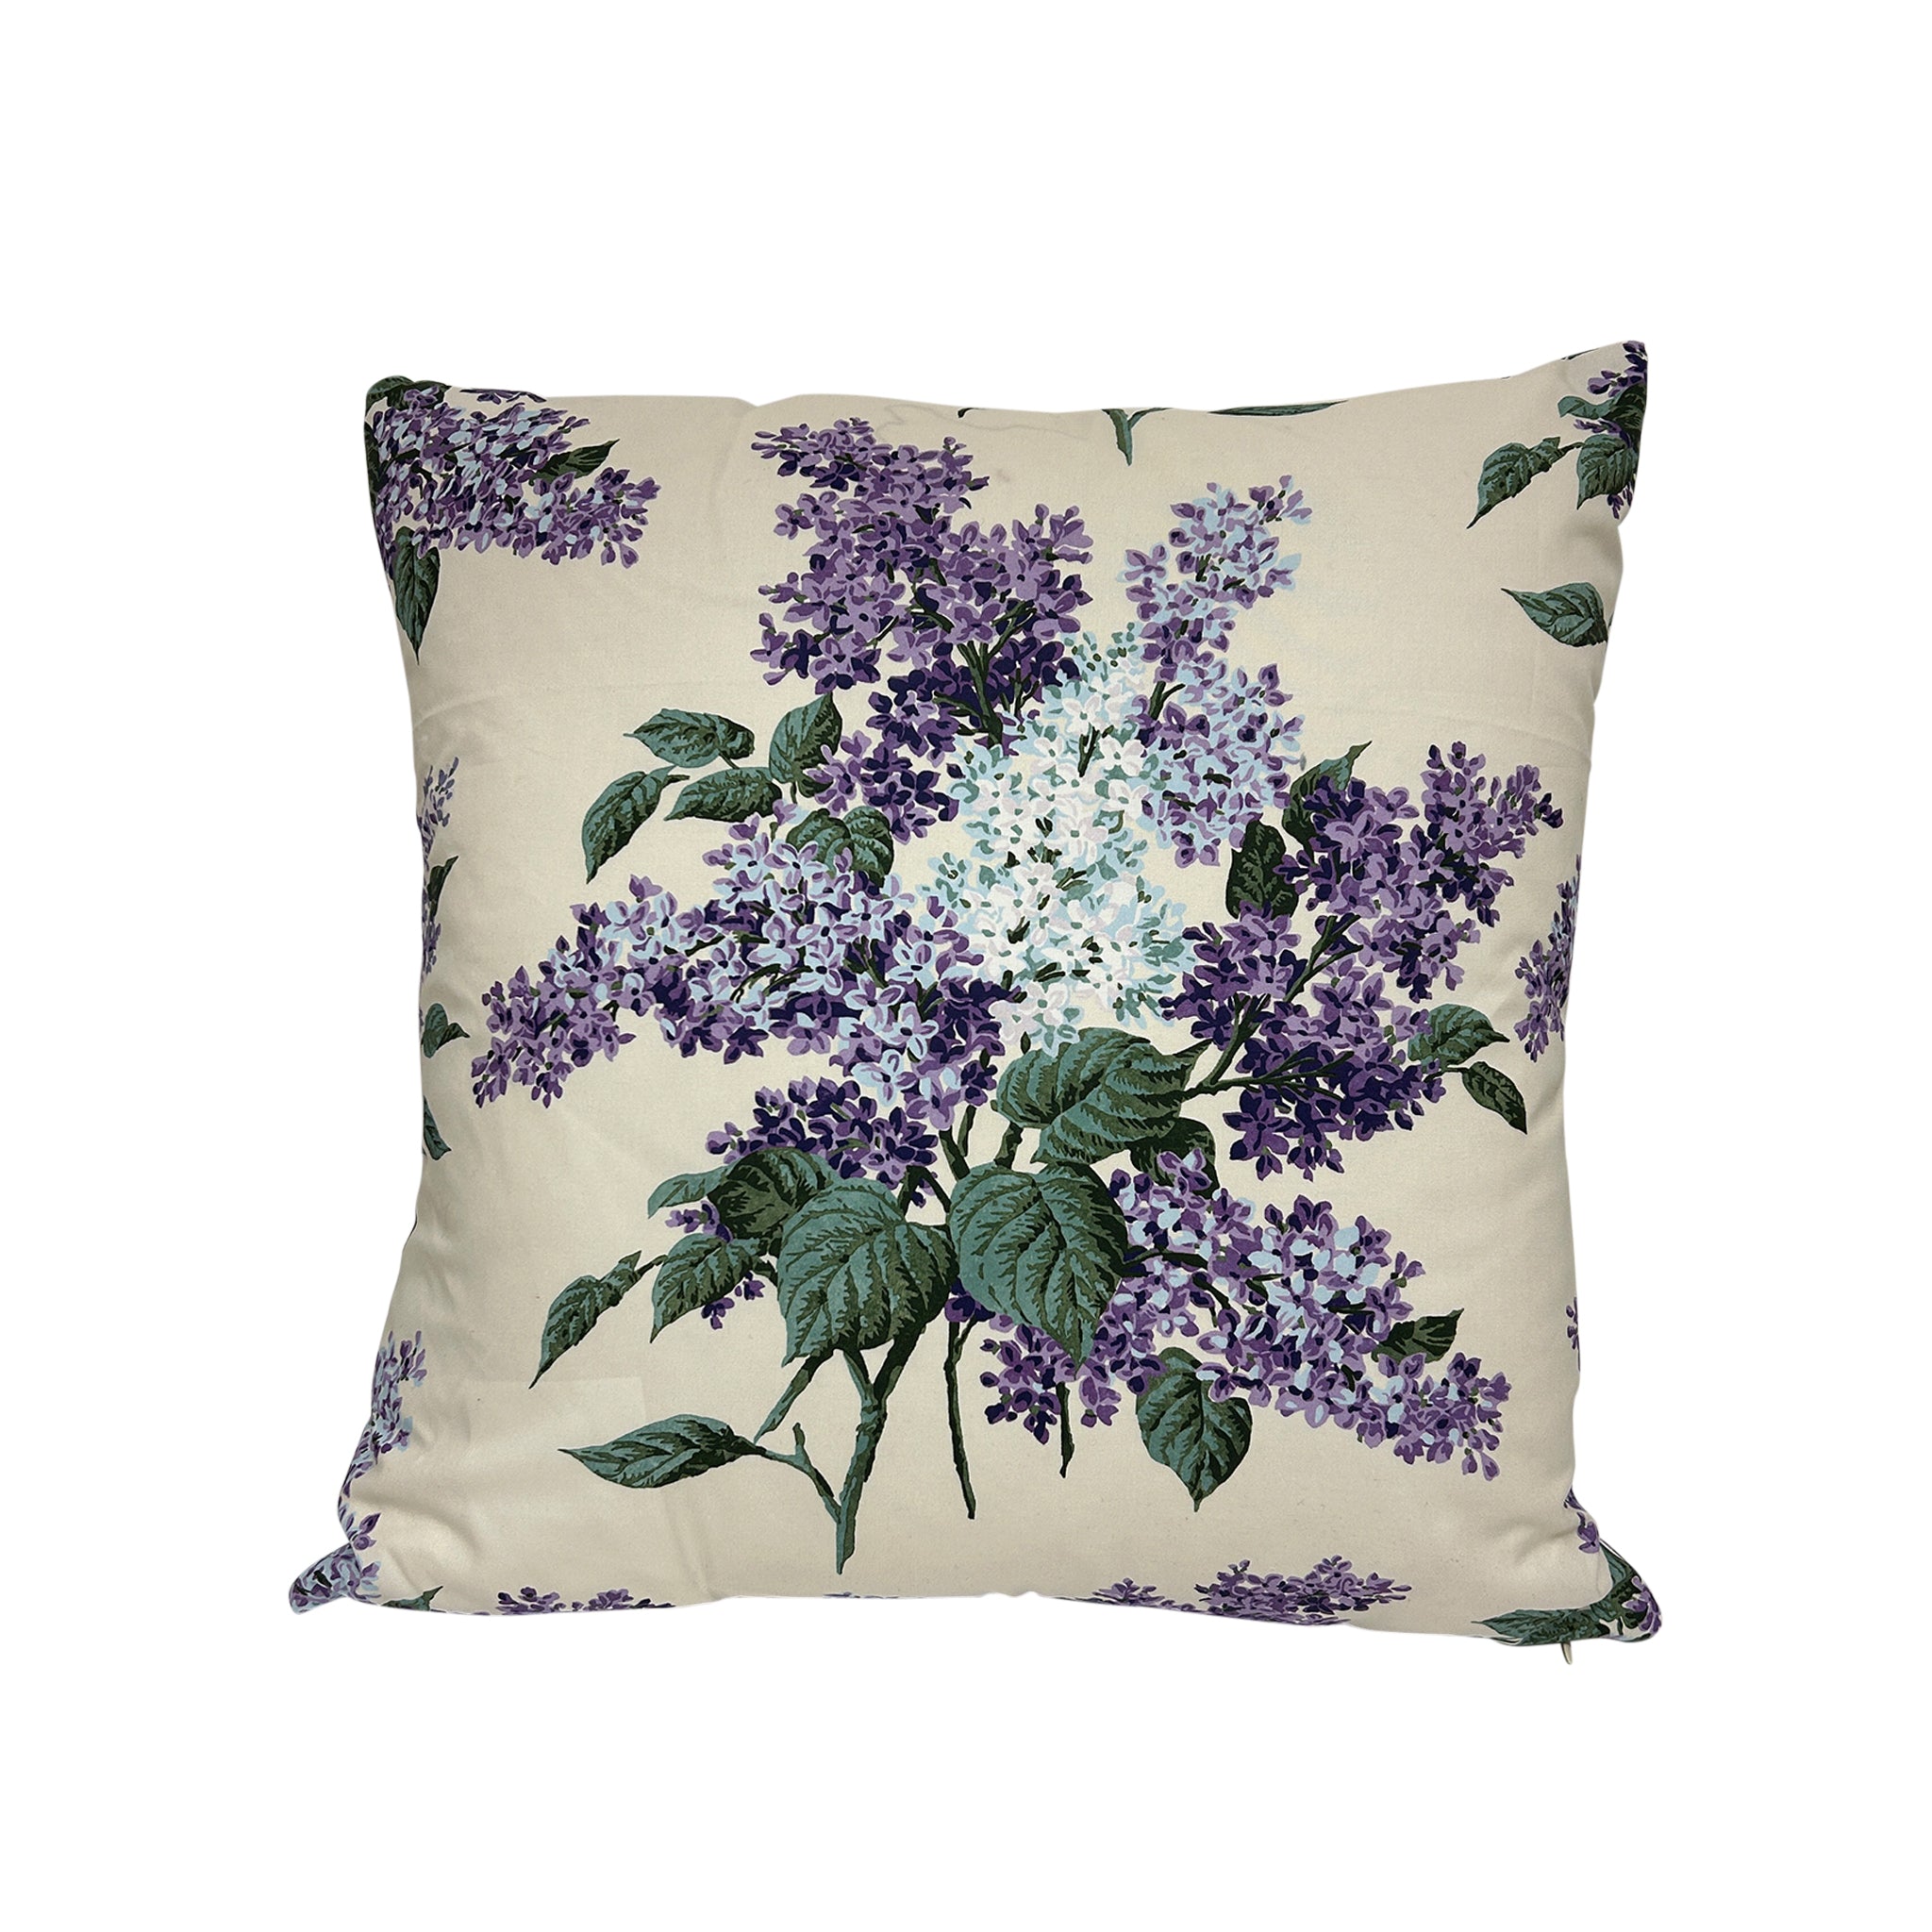 Proust's Lilacs in Purple Pillow